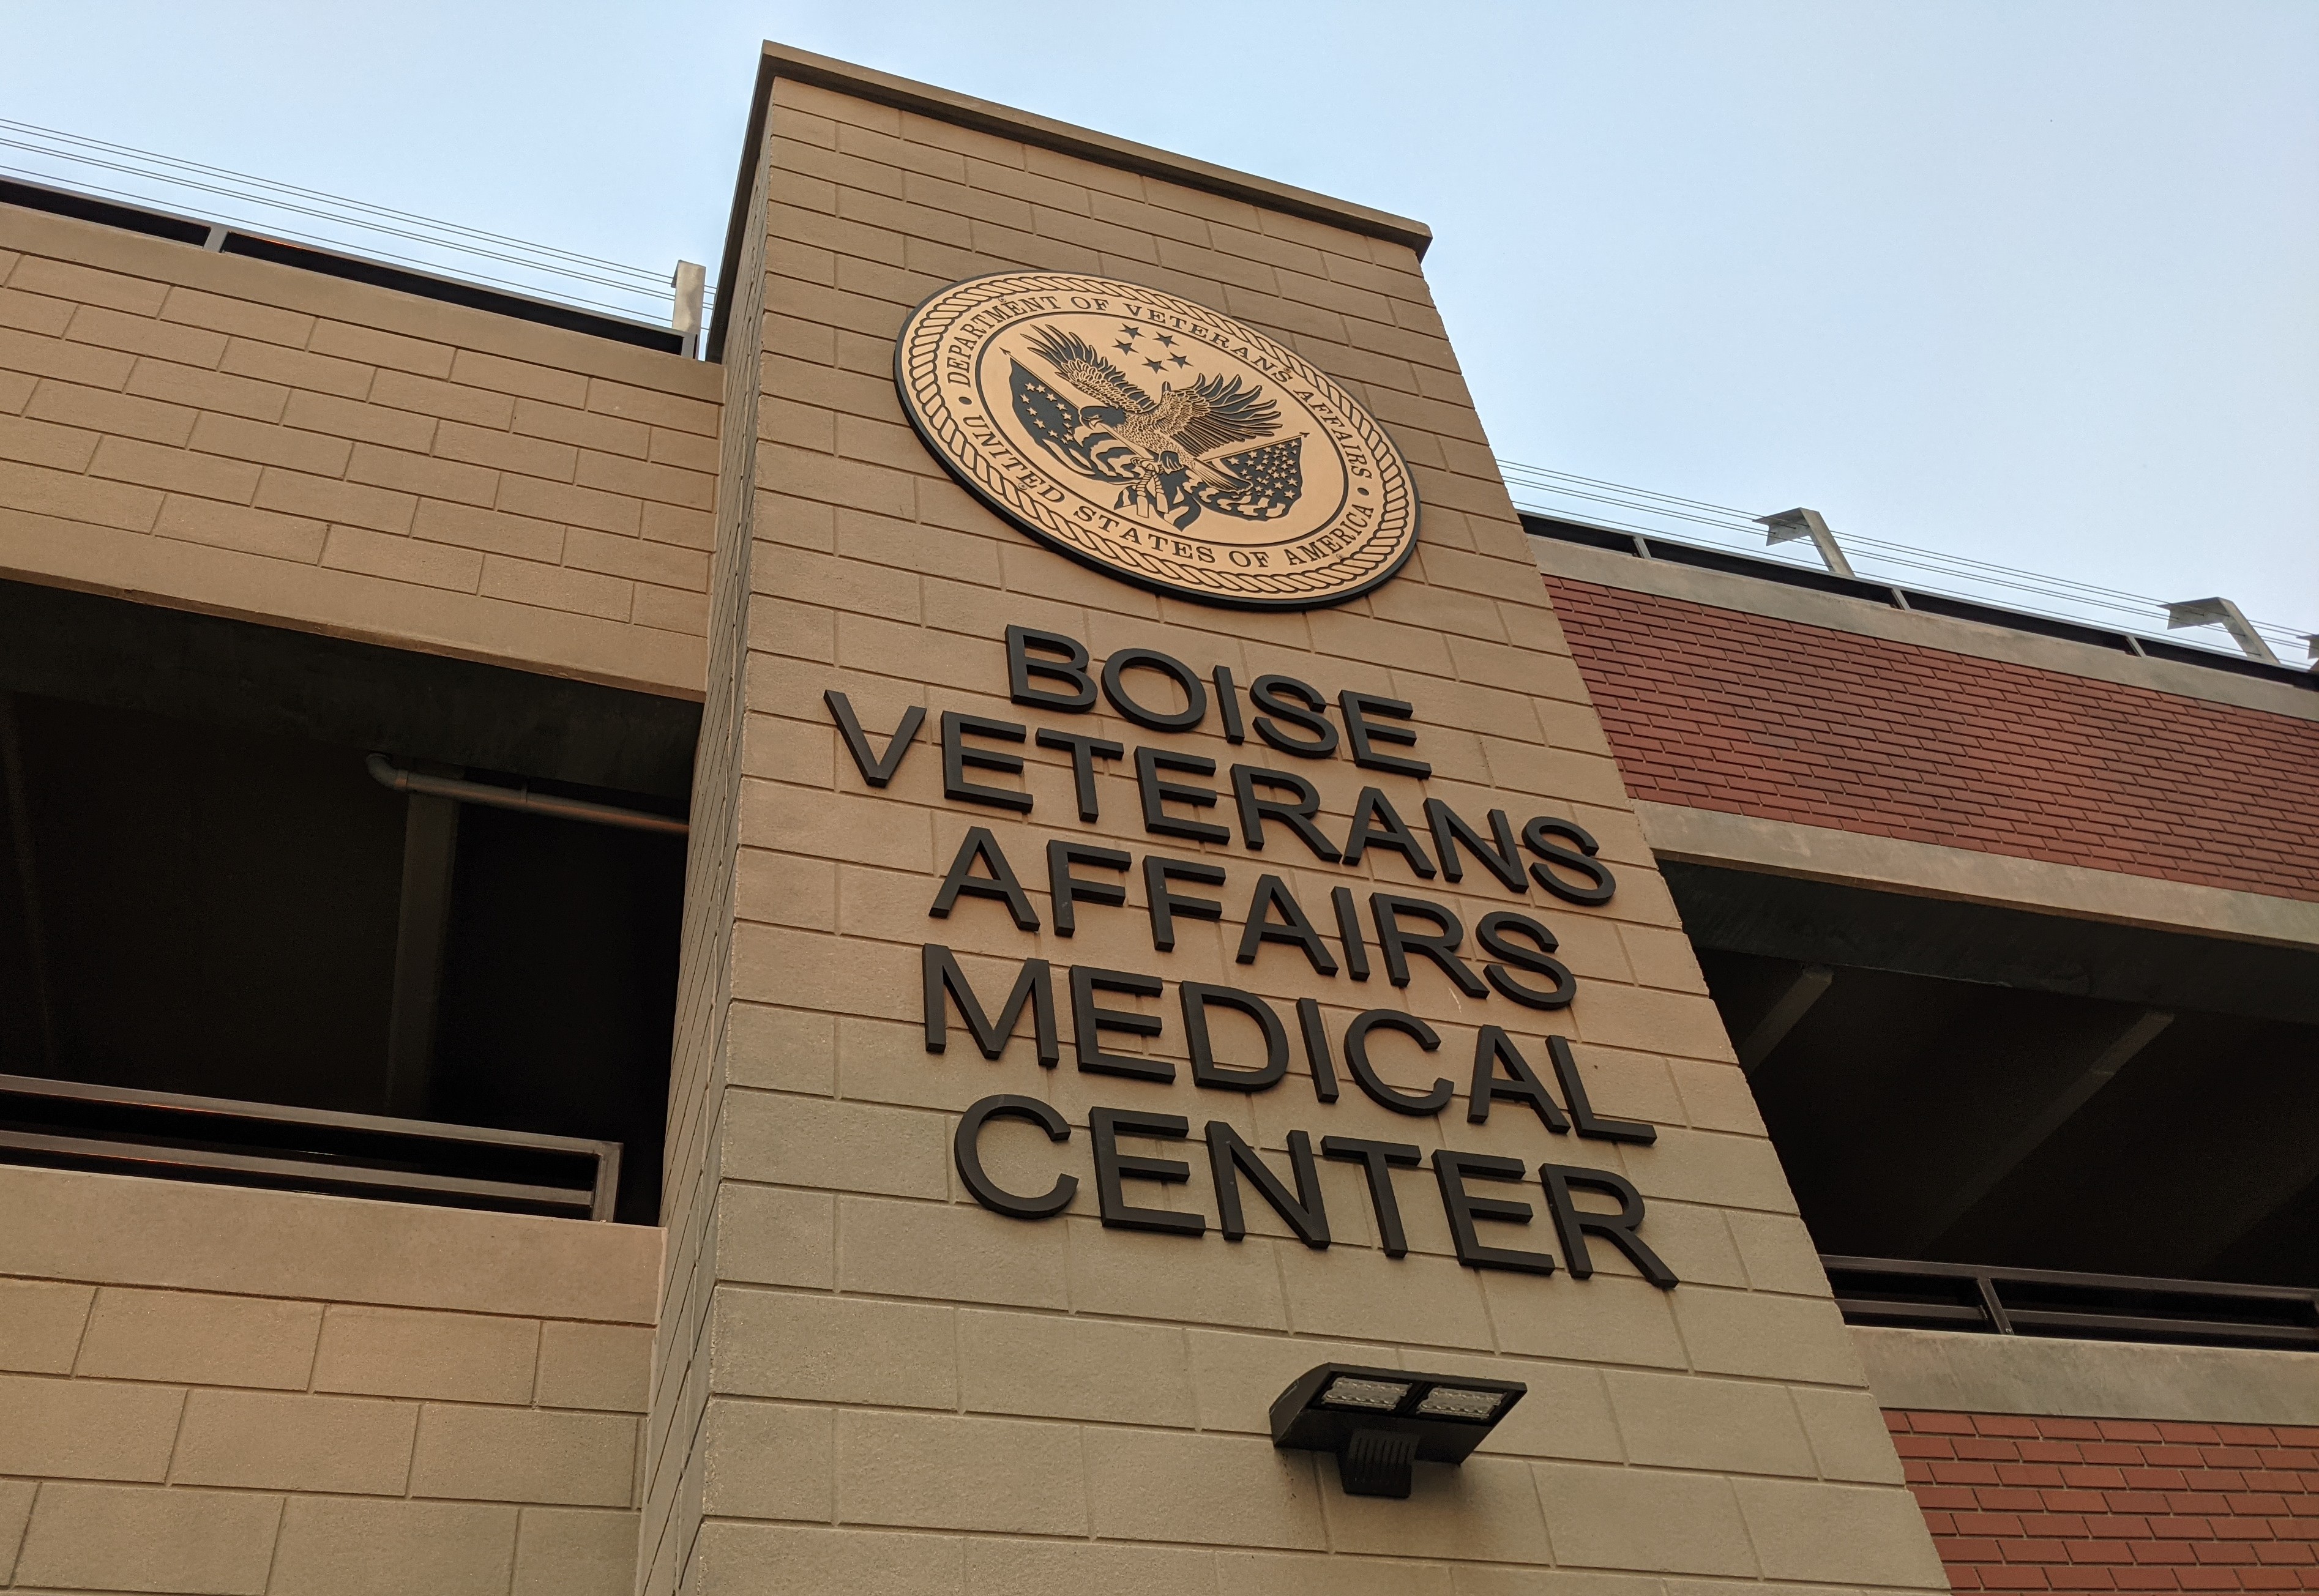 The Boise VA Medical Center offered to start taking civilian patients, to help ease the strain on hospitals. The VA usually only takes patients who served in the military.